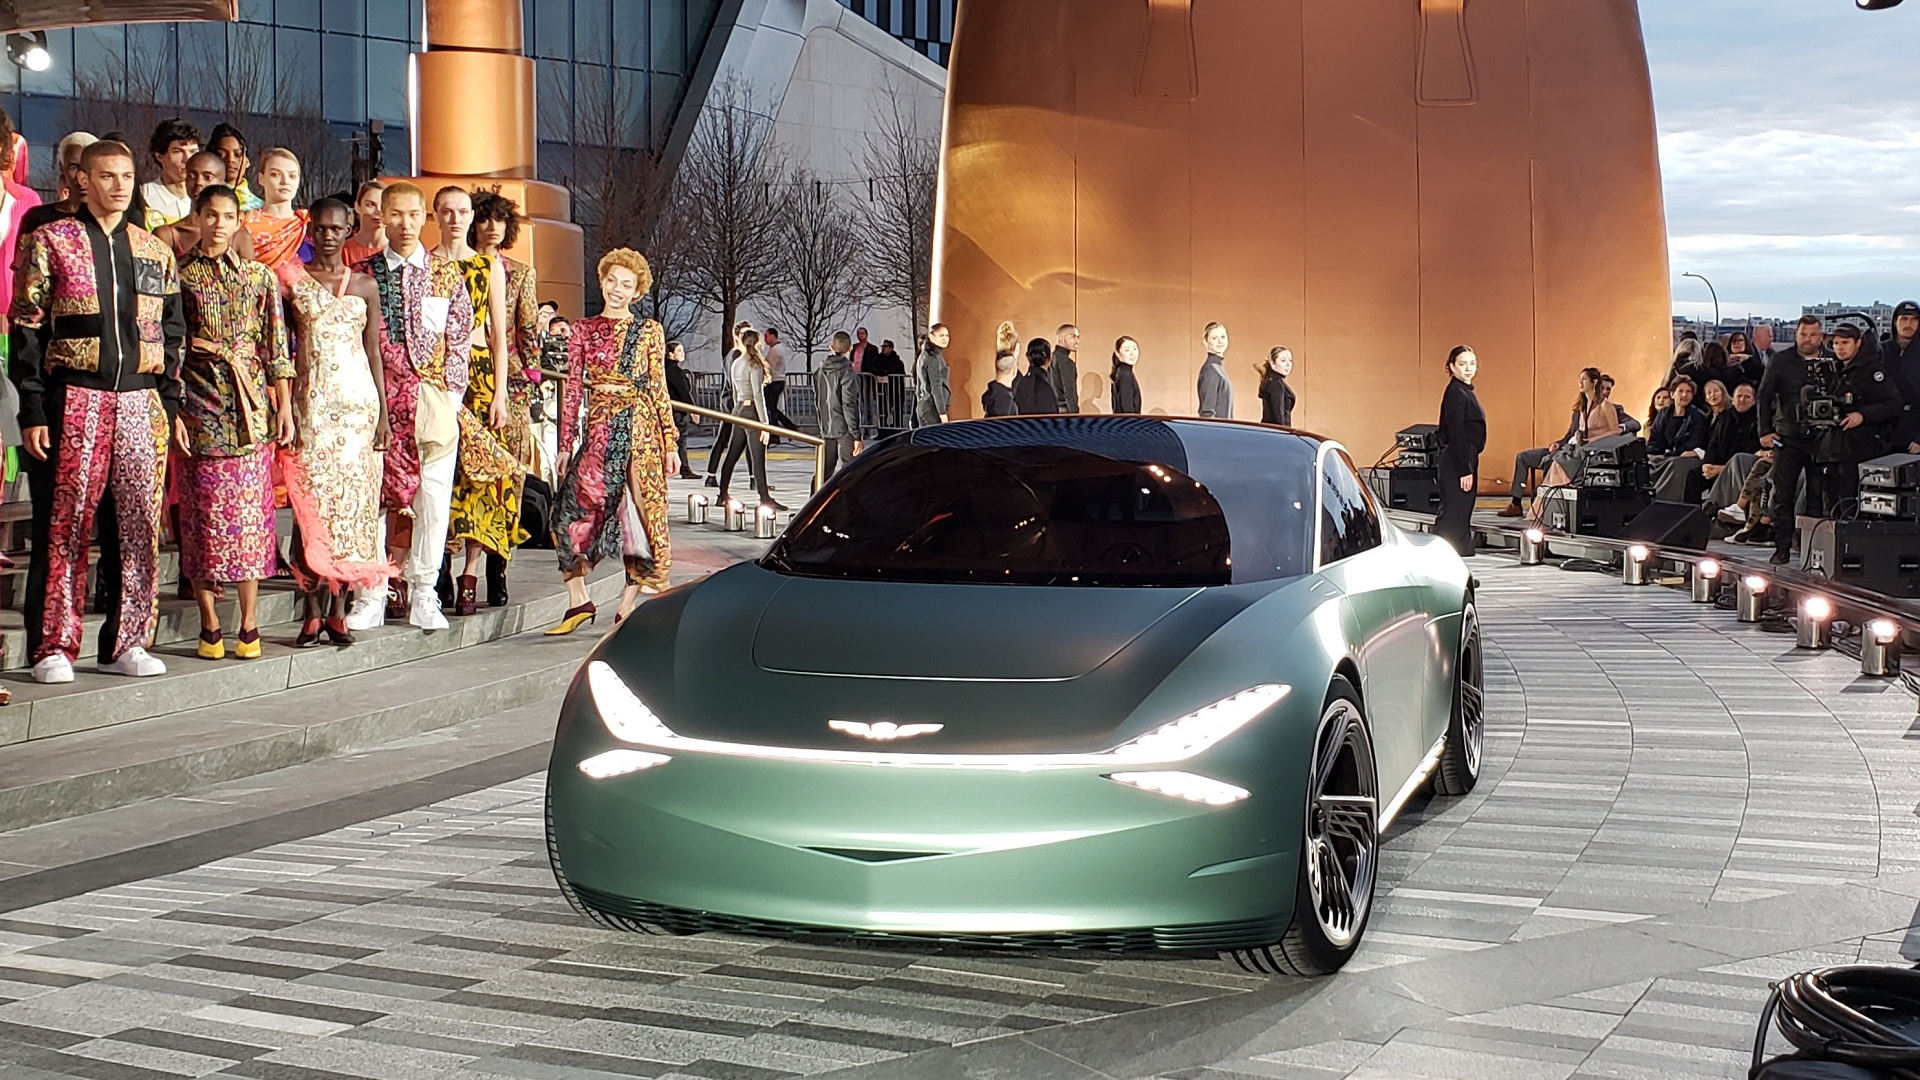 Genesis Mint Concept debut, Hudson Yards, NYC - 2019 New York auto show